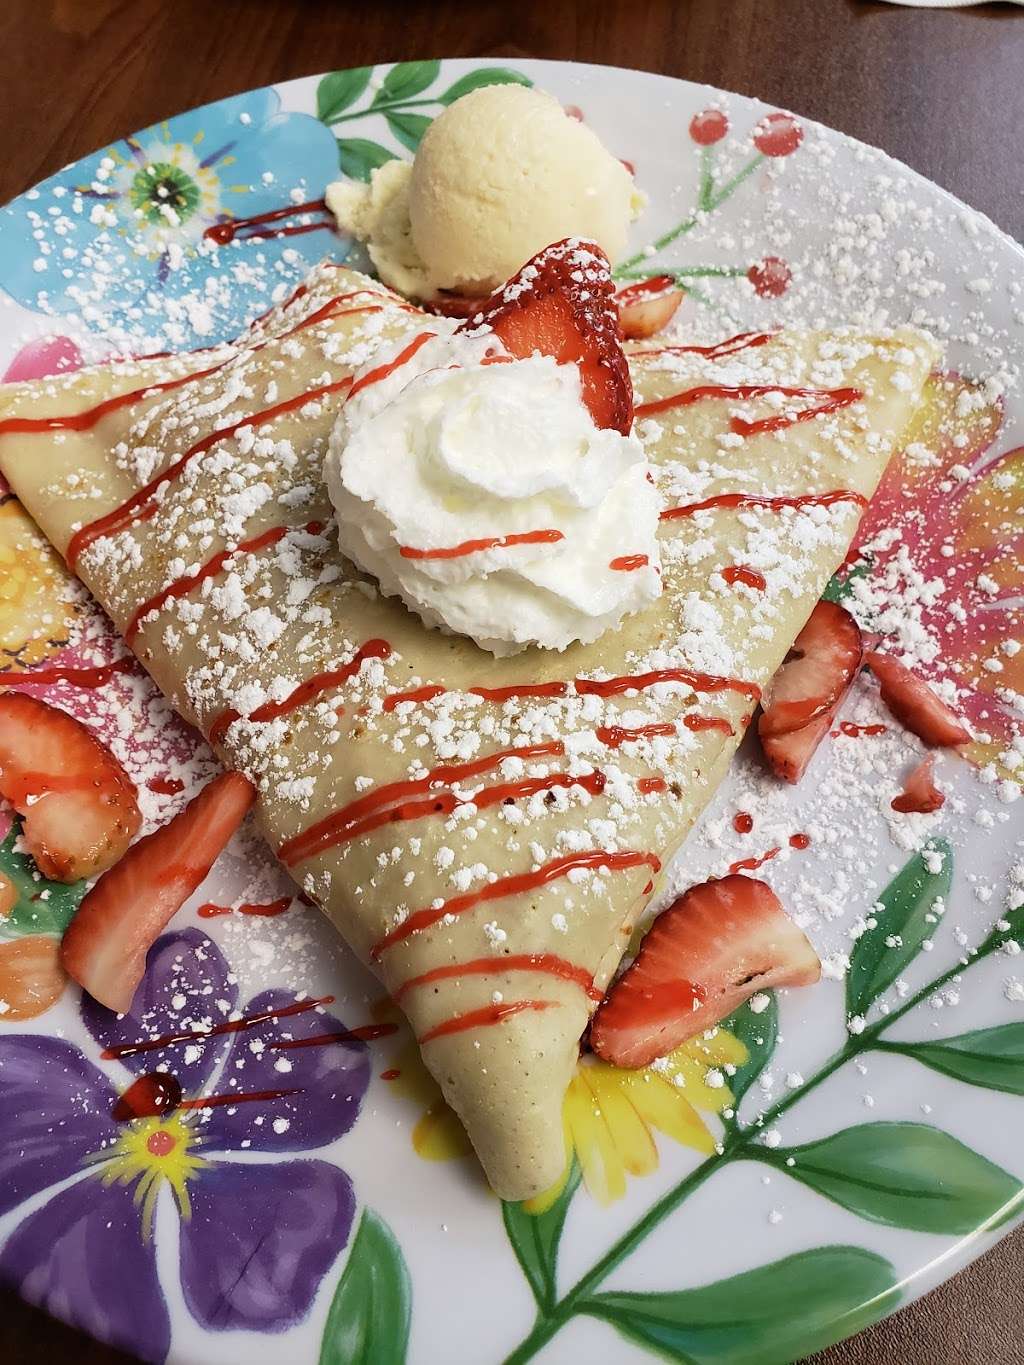 Crepes by the Bay | 413 S Talbot St, St Michaels, MD 21663 | Phone: (410) 745-8429